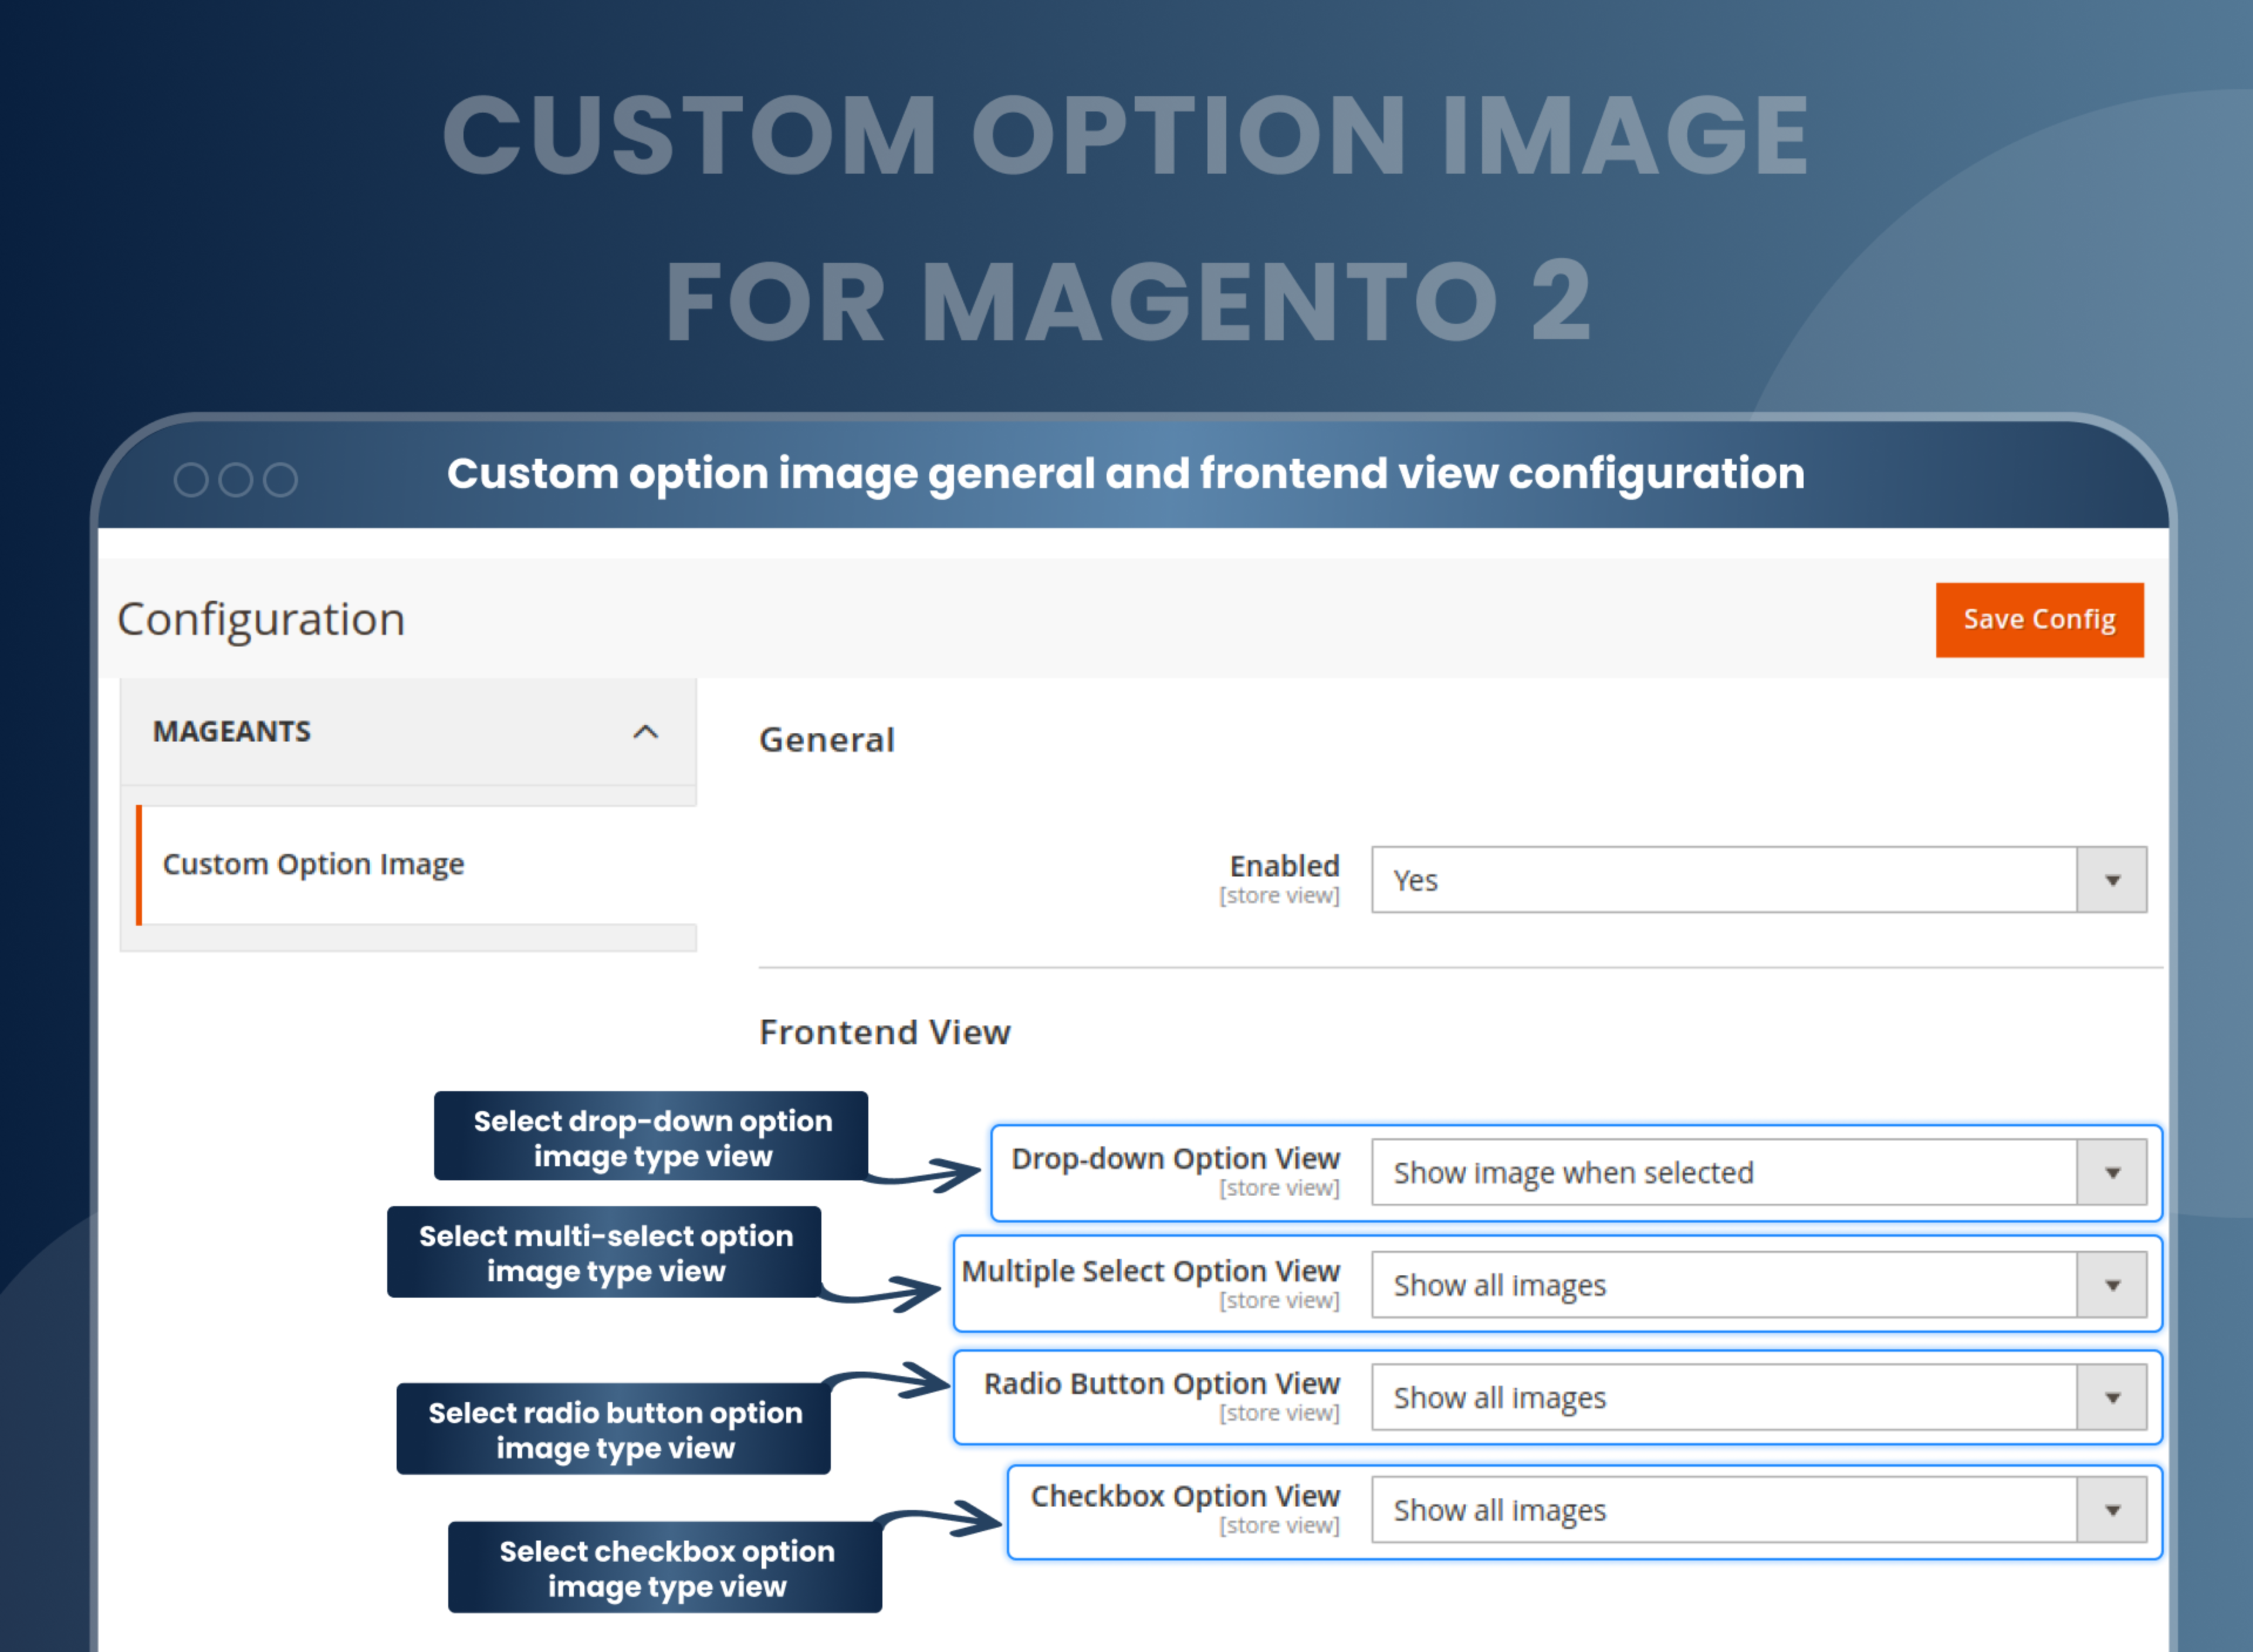 Custom option image general and frontend view configuration